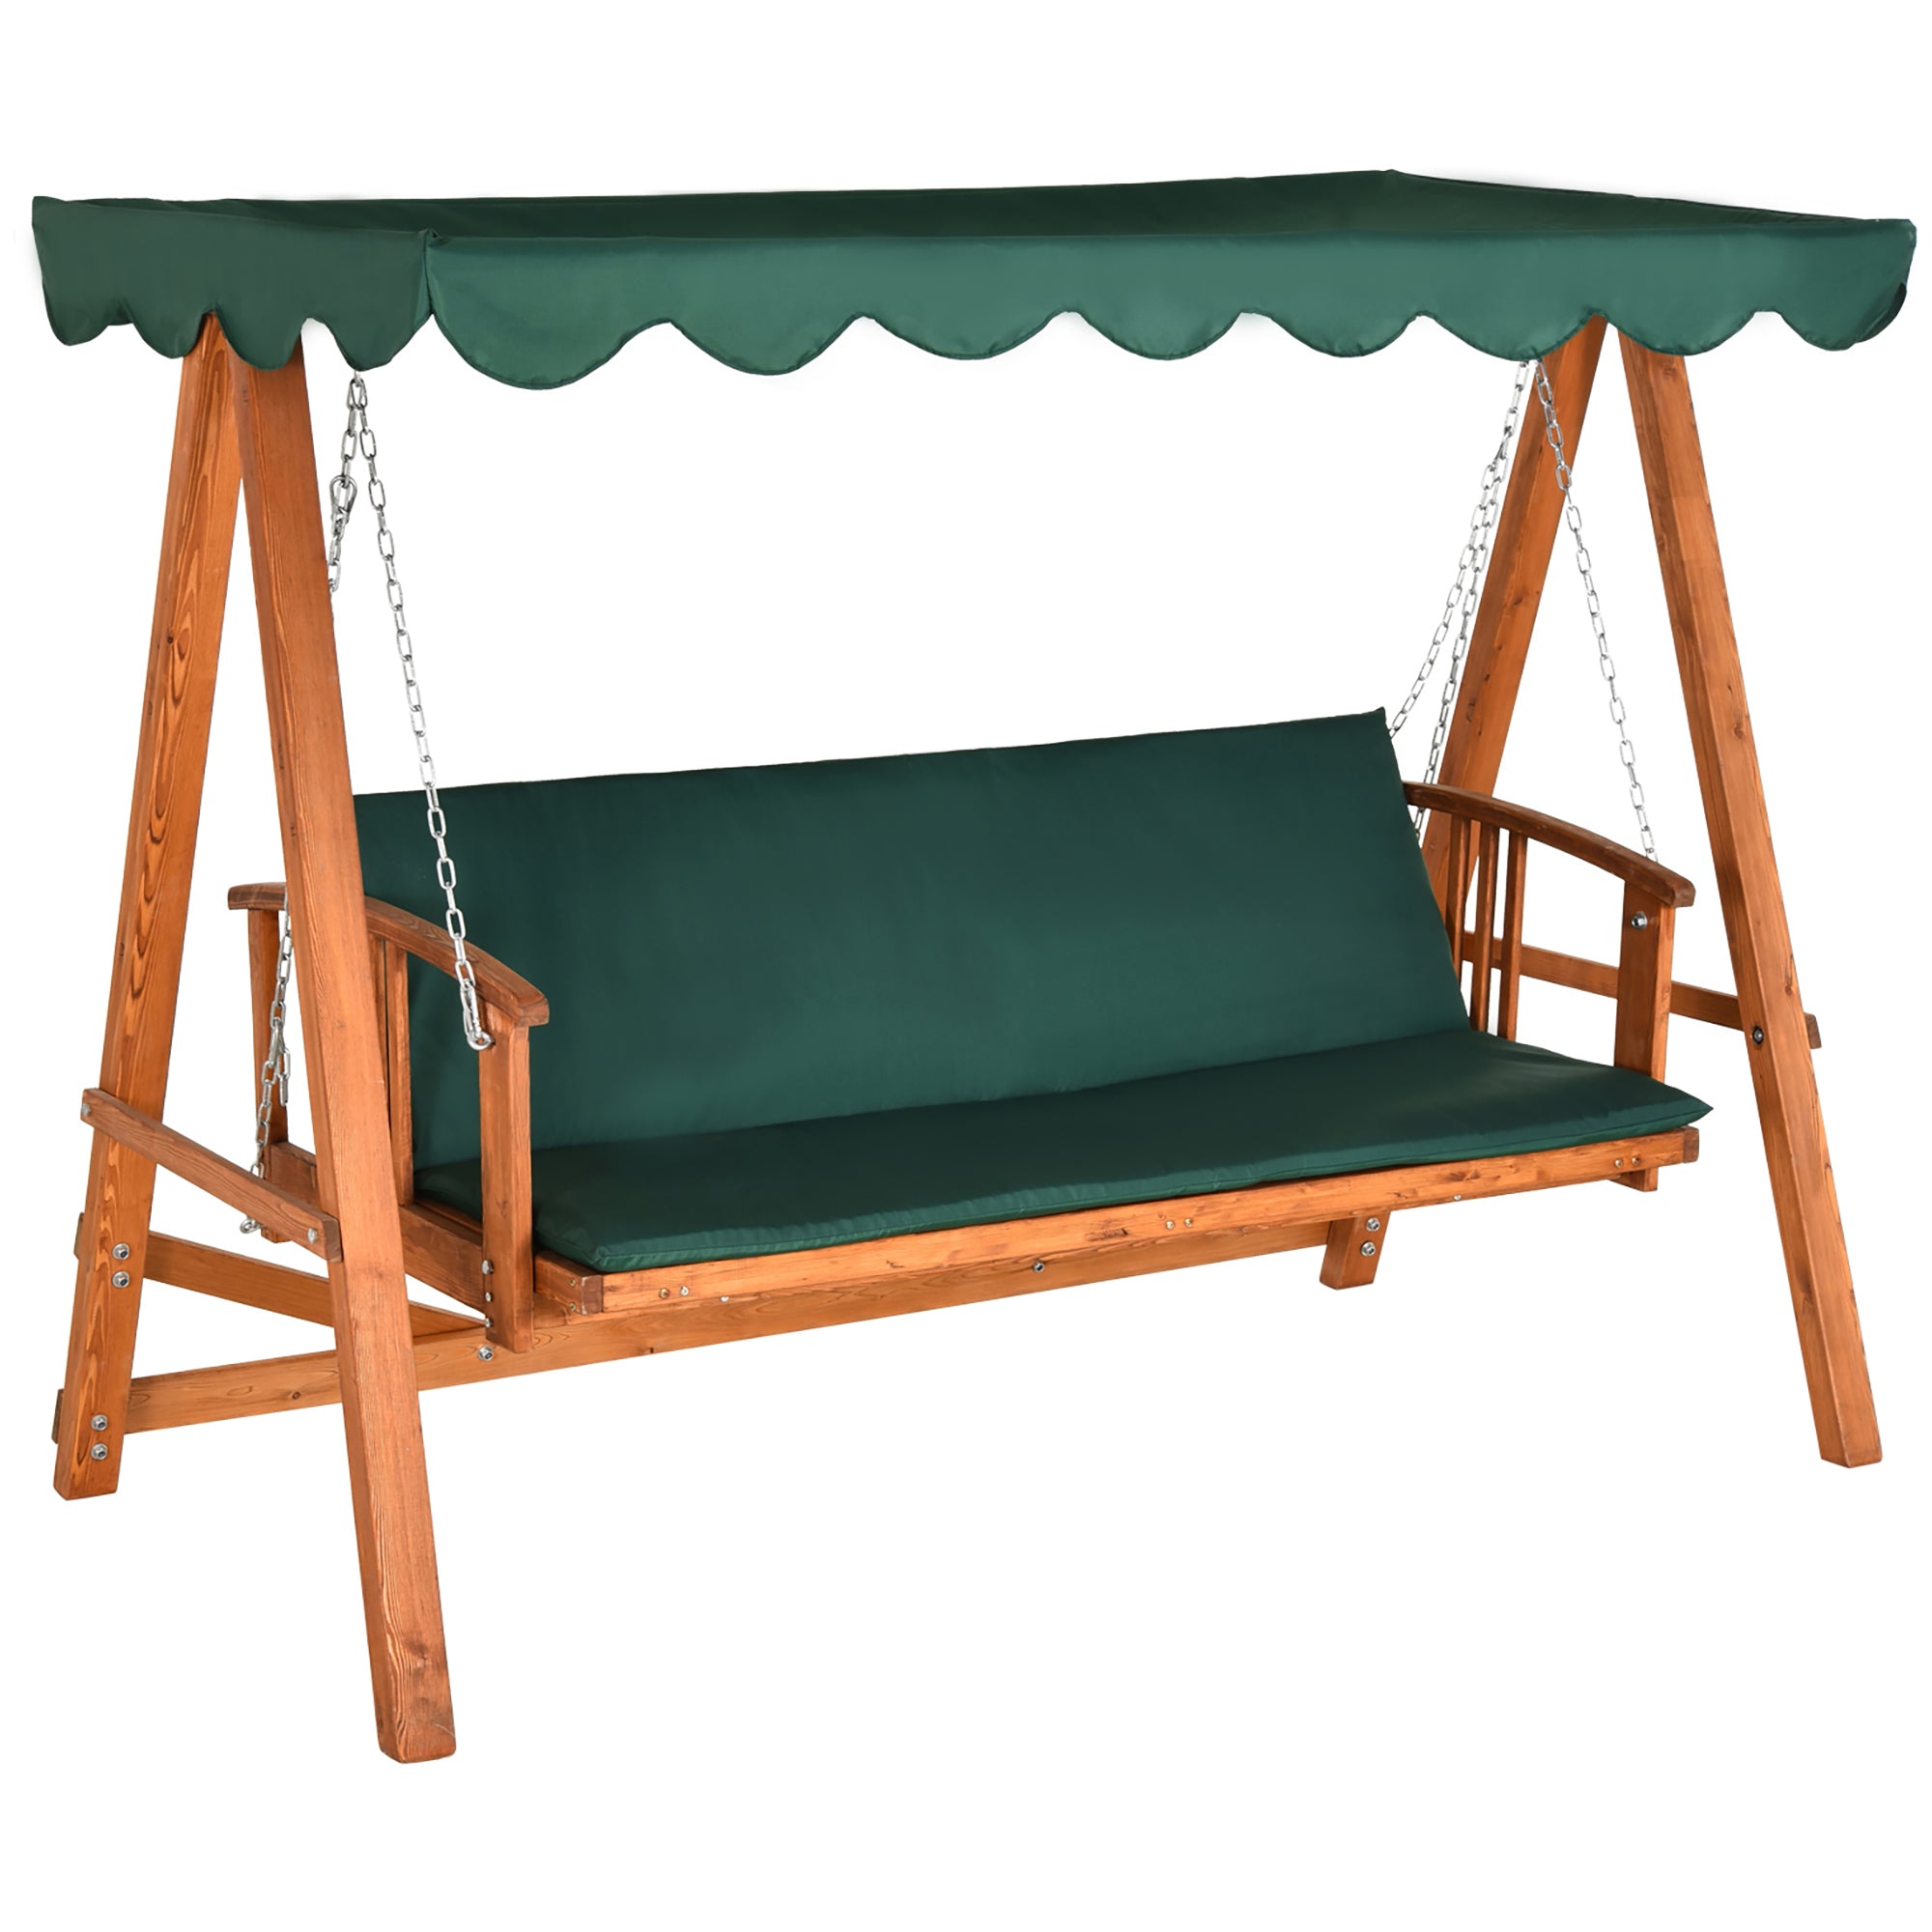 Outsunny Wooden Garden Swing Seat 3 Seater  | TJ Hughes Green